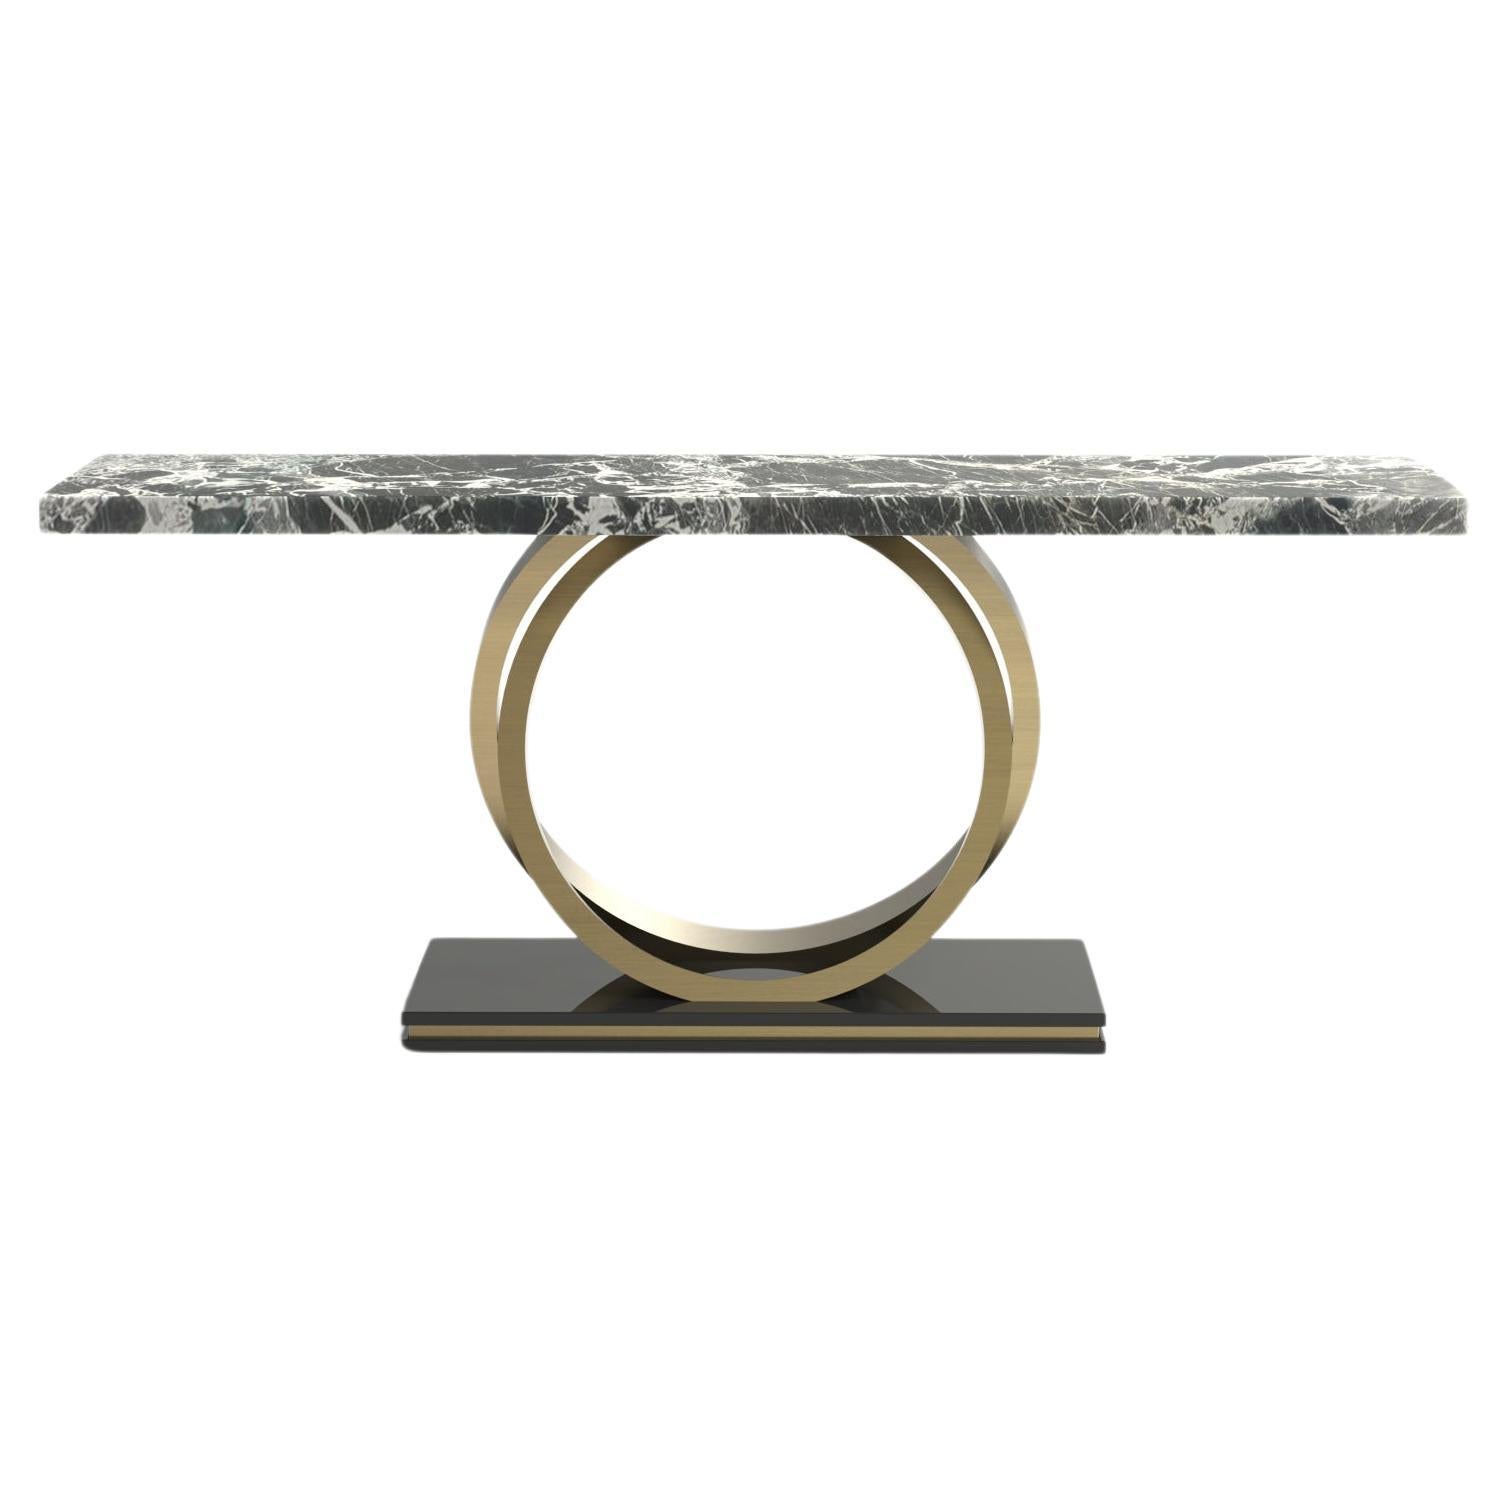 Portuguese Modern Armilar Console Table, Grand Antique Noir Marble, Handmade by Greenapple For Sale